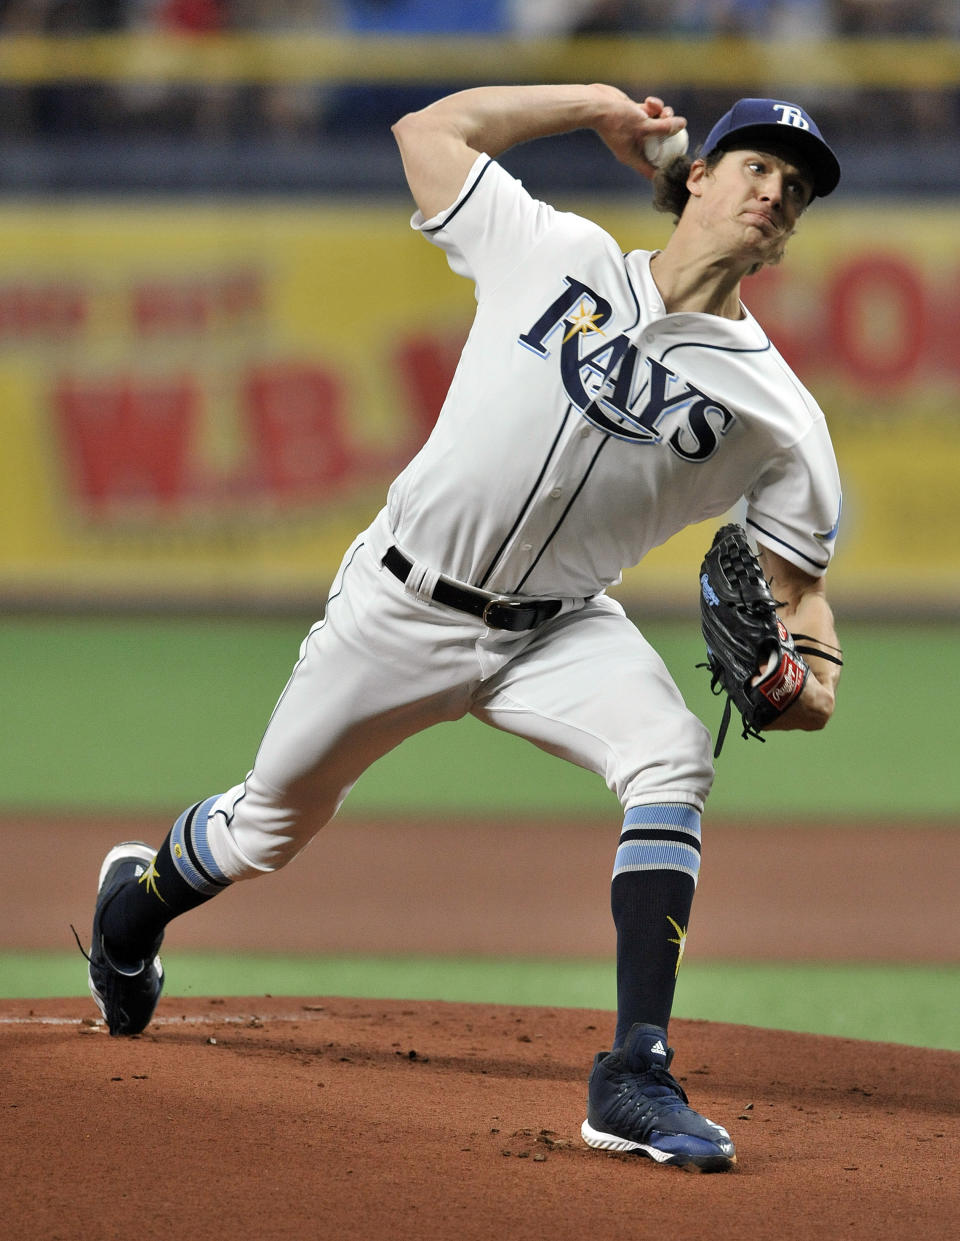 Tampa Bay Rays starter Tyler Glasnow pitches against the New York Yankees during the first inning of a baseball game Friday, May 10, 2019, in St. Petersburg, Fla. (AP Photo/Steve Nesius)